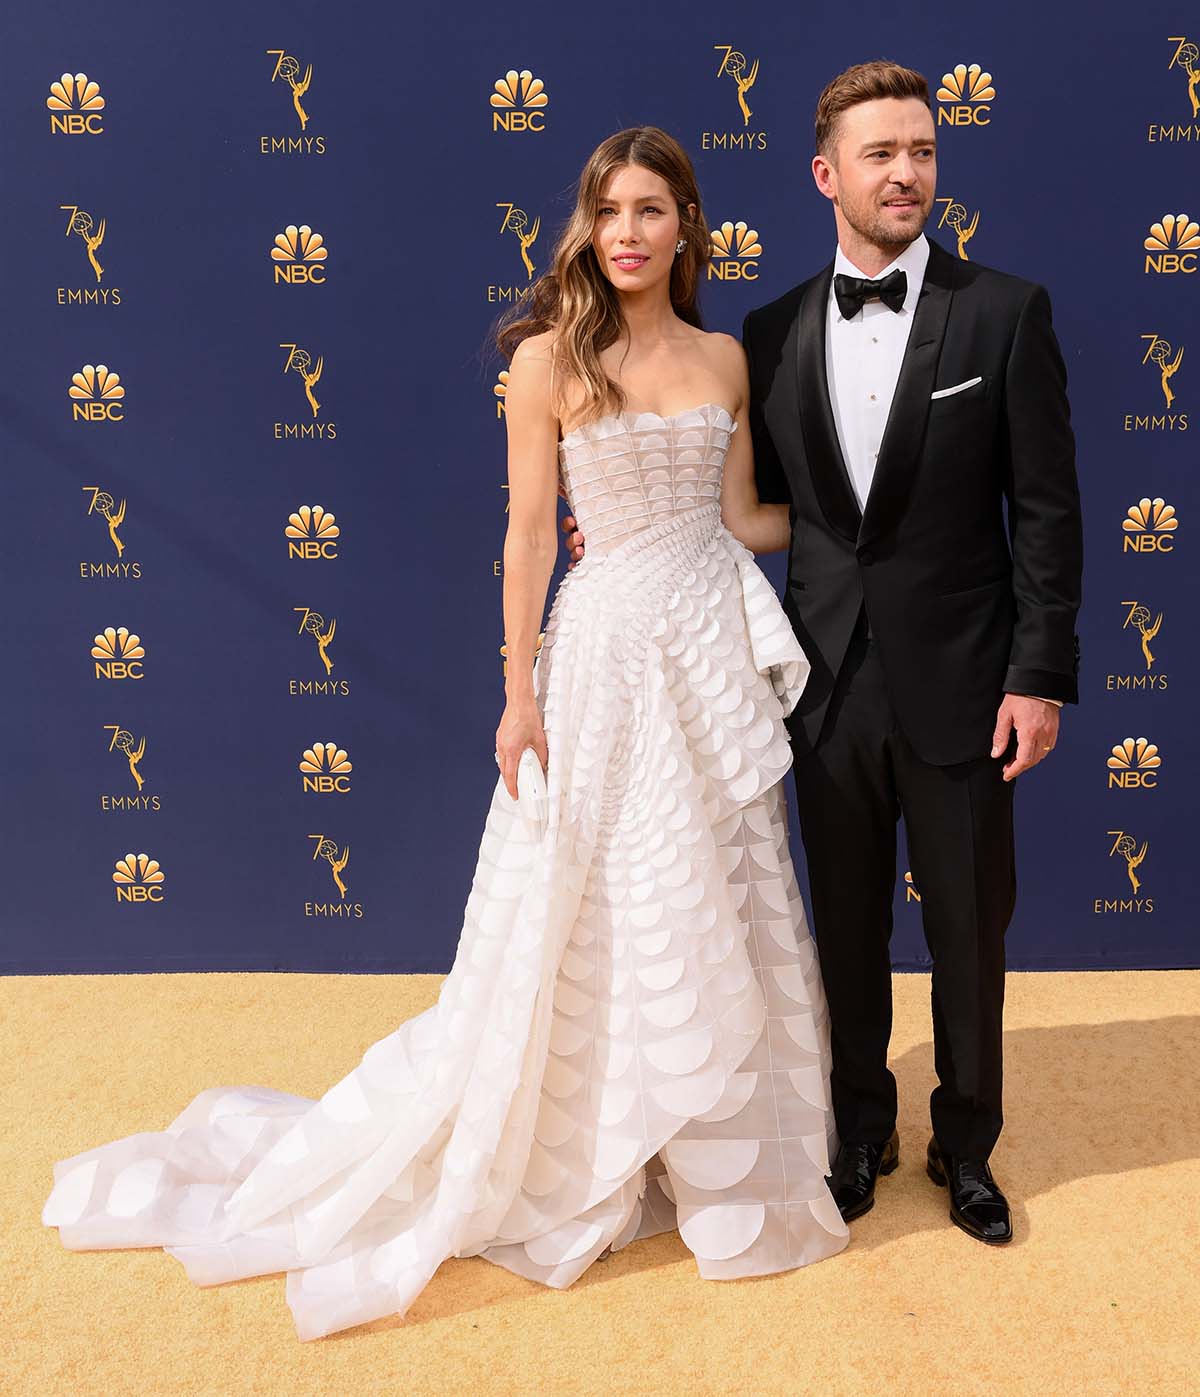 Justin Timberlake and Jessica Biel Archives - STYLE DU MONDE